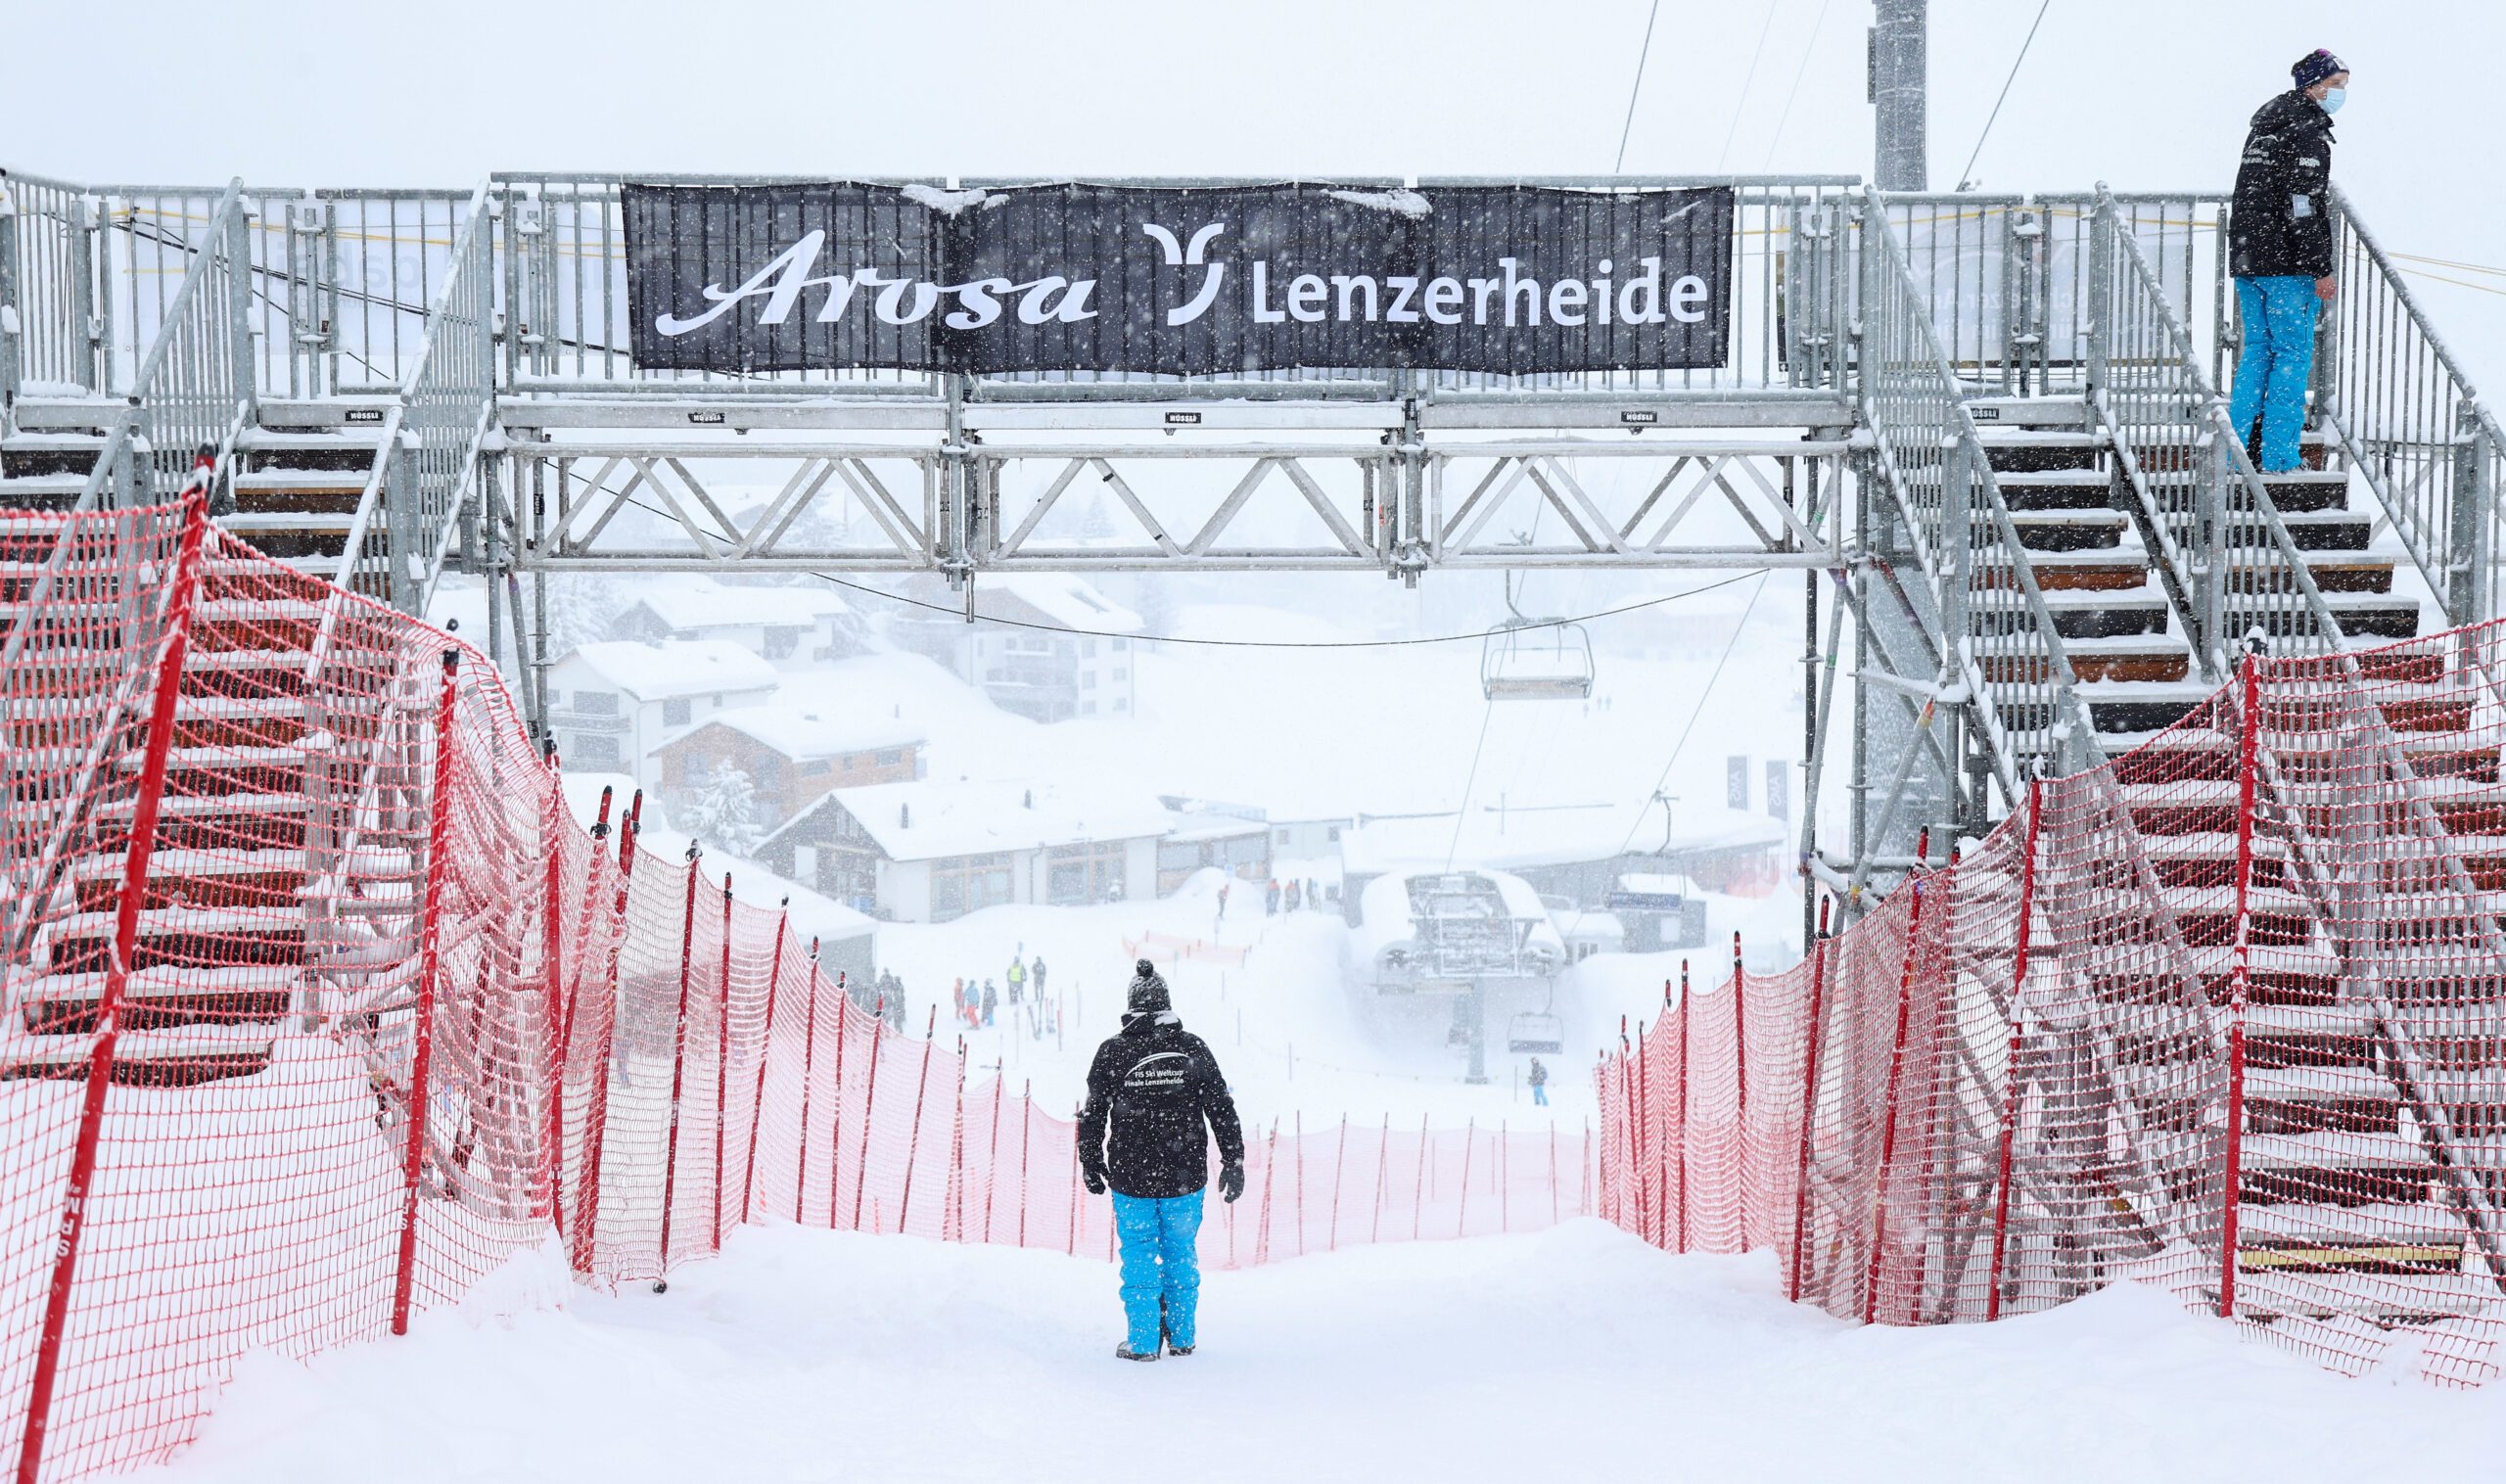 LENZERHEIDE,SWITZERLAND,17.MAR.21- ALPINE SKIING - FIS World Cup Final, preview. Image shows a feature with a banner.